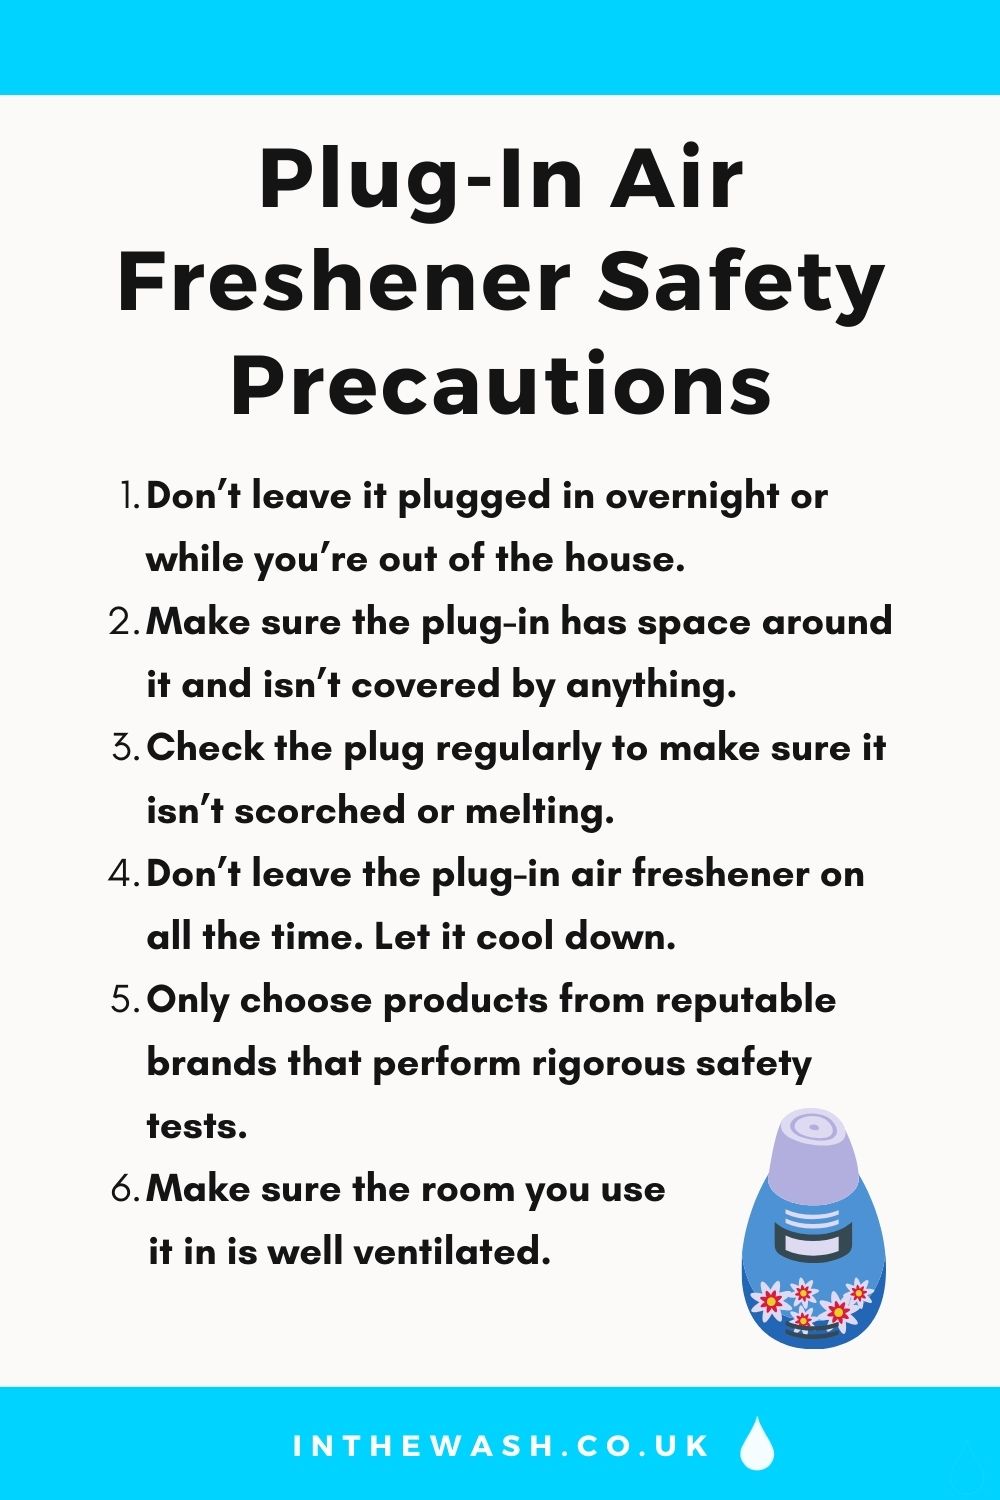 Plug-in air freshener safety precautions